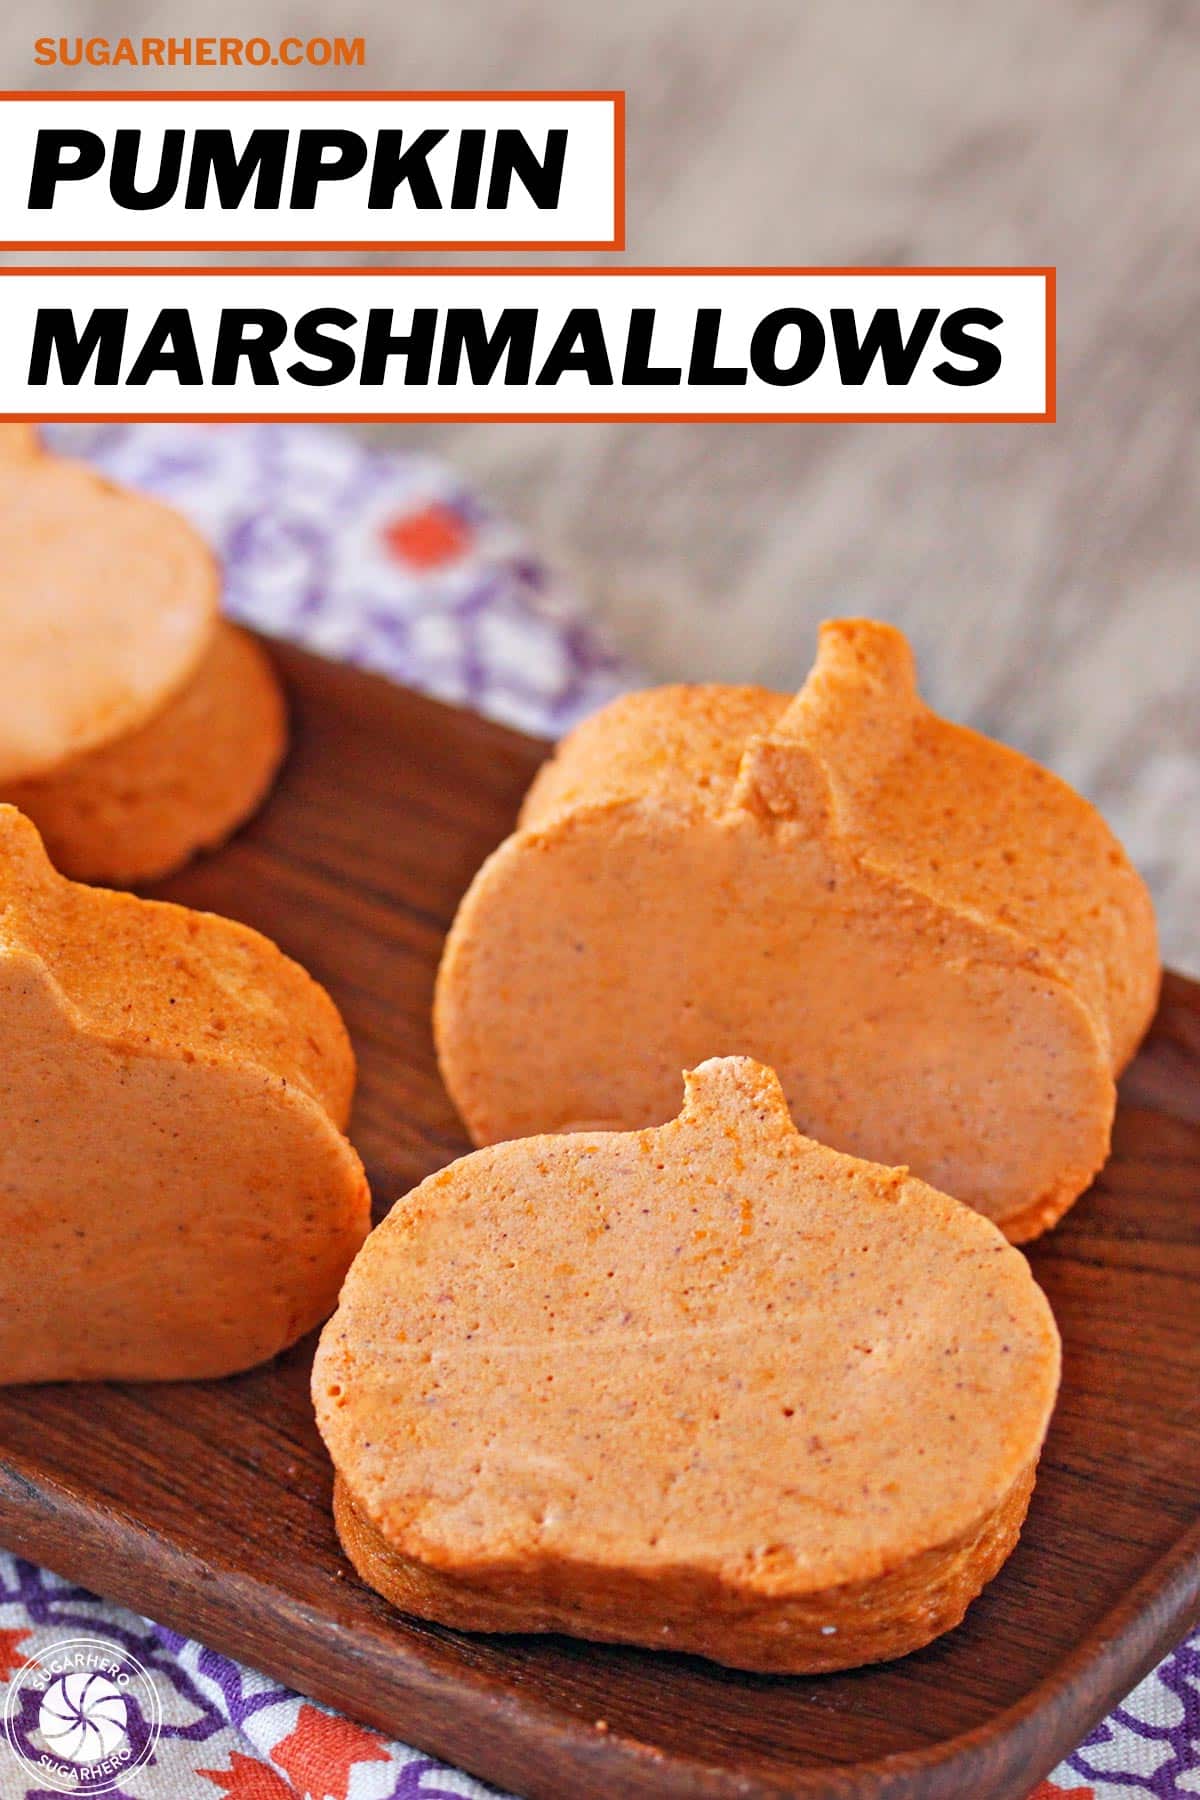 Photo of Pumpkin Marshmallows with text overlay for Pinterest.